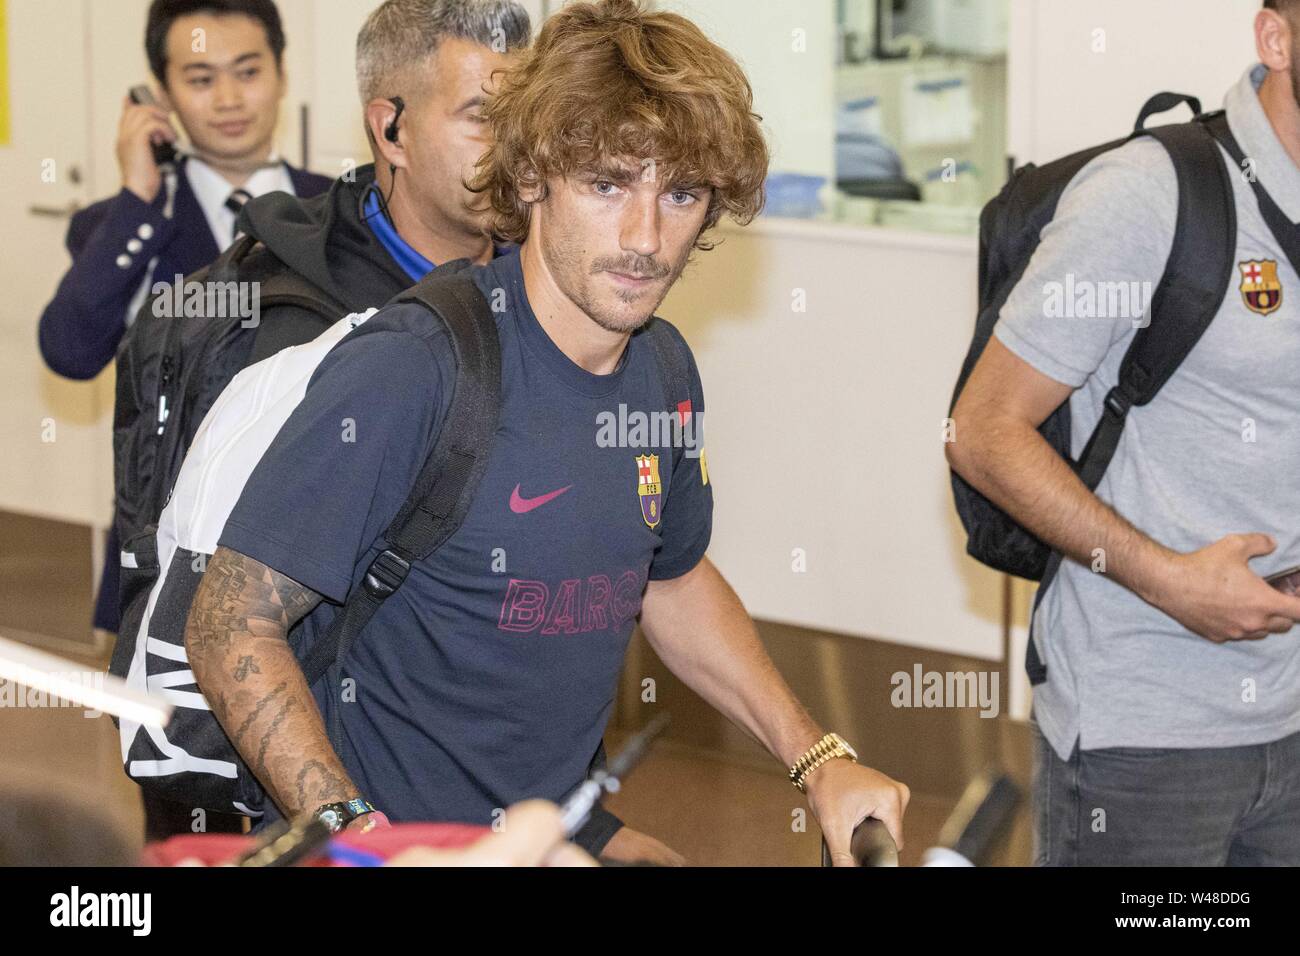 Tokyo Japan 21st July 2019 Fc Barcelona Player Antoine Griezmann Arrives At Tokyo International Airport Fc Barcelona Team Came To Japan To Play In The Rakuten Cup Many Japanese Fans Waited With